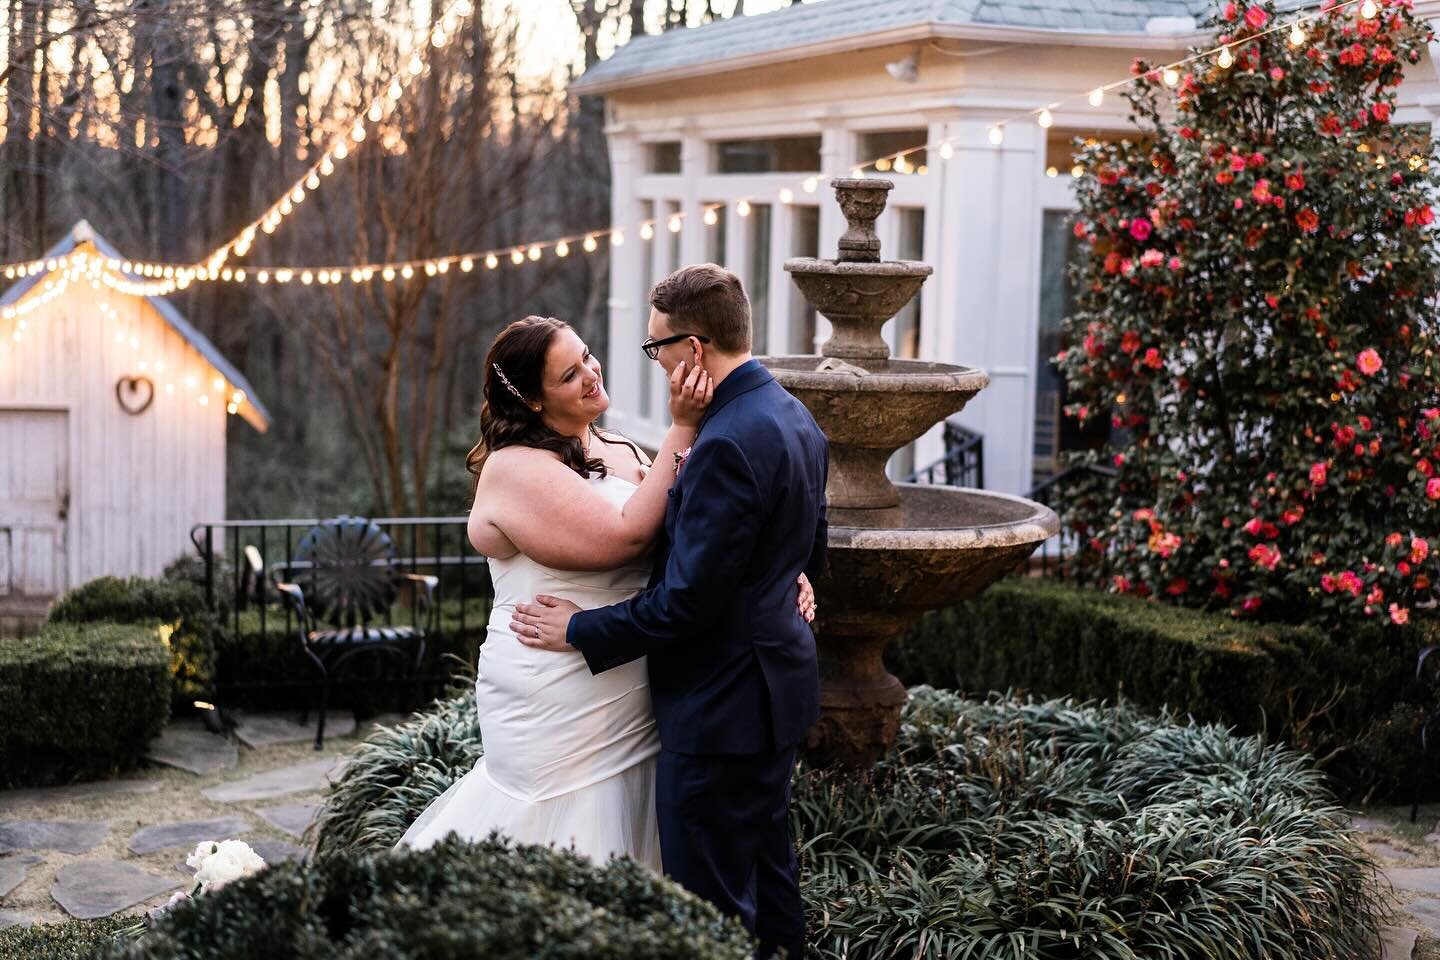 First day of spring sunsets hit different.
We are so excited for a new season! For new blossoms and new love stories to share 🤍 Click the link in our profile if your love story is one that will begin at the always stunning Primrose Cottage!

Photo: 